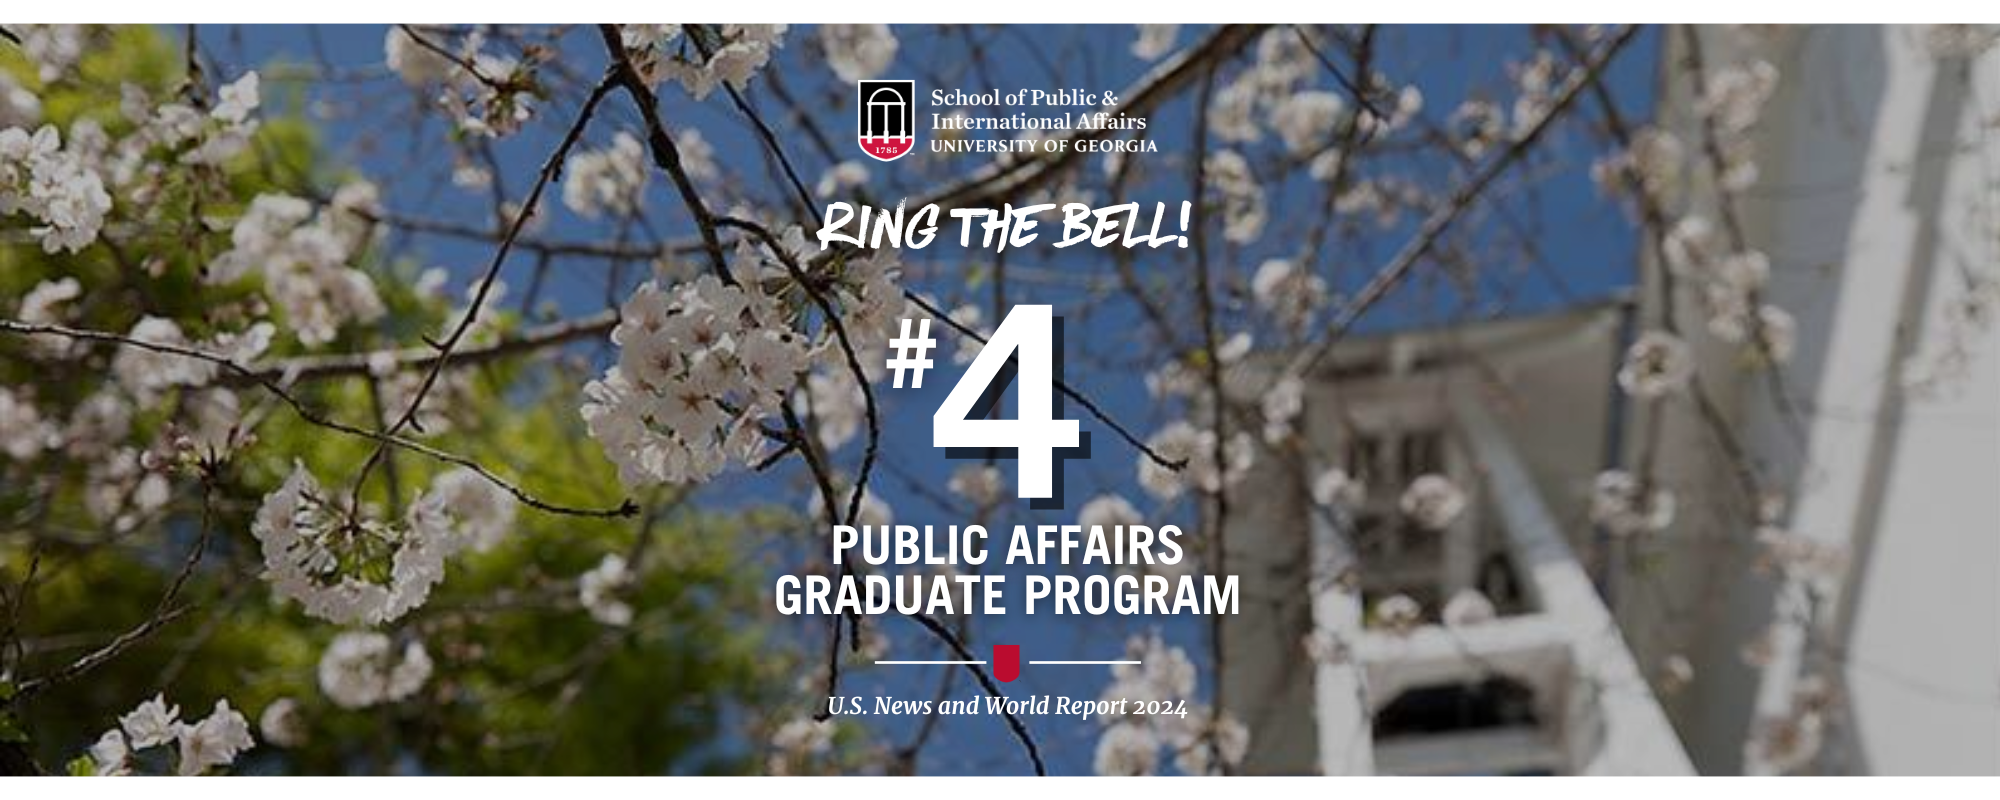 SPIA Ranks 4th in the Nation for Public Affairs Graduate Programs